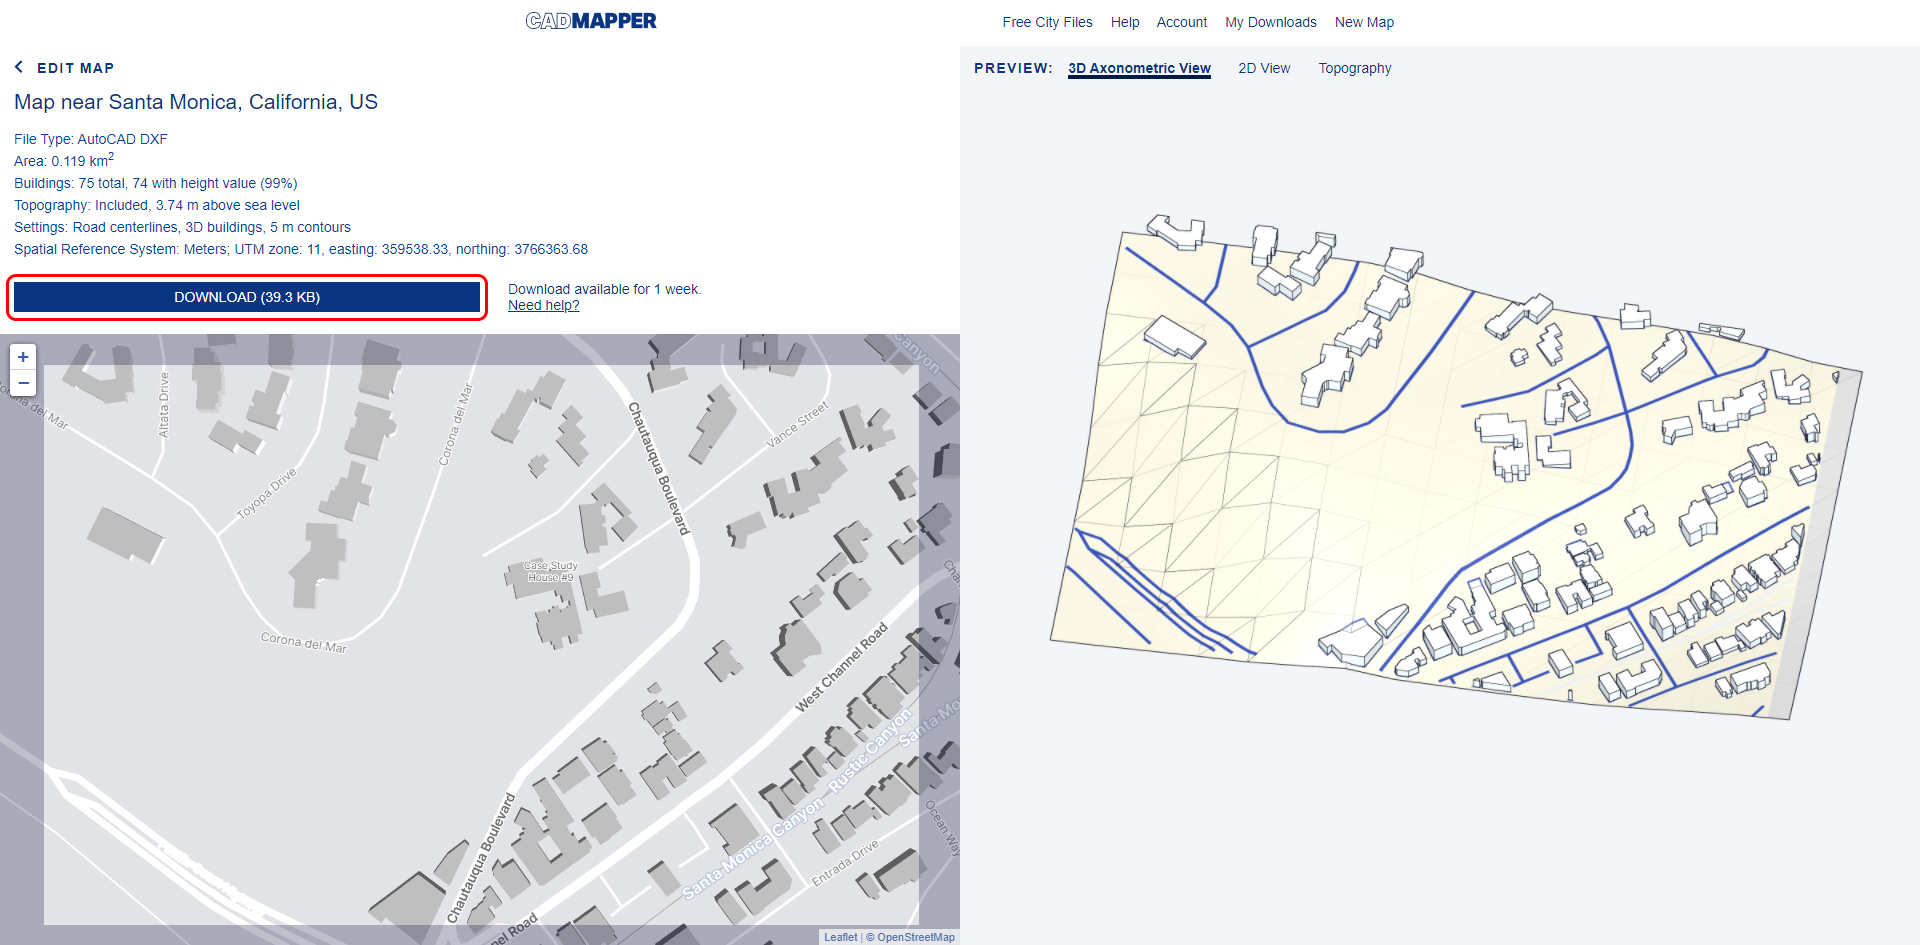 This image shows the CAD mapper website for the Eames house project.